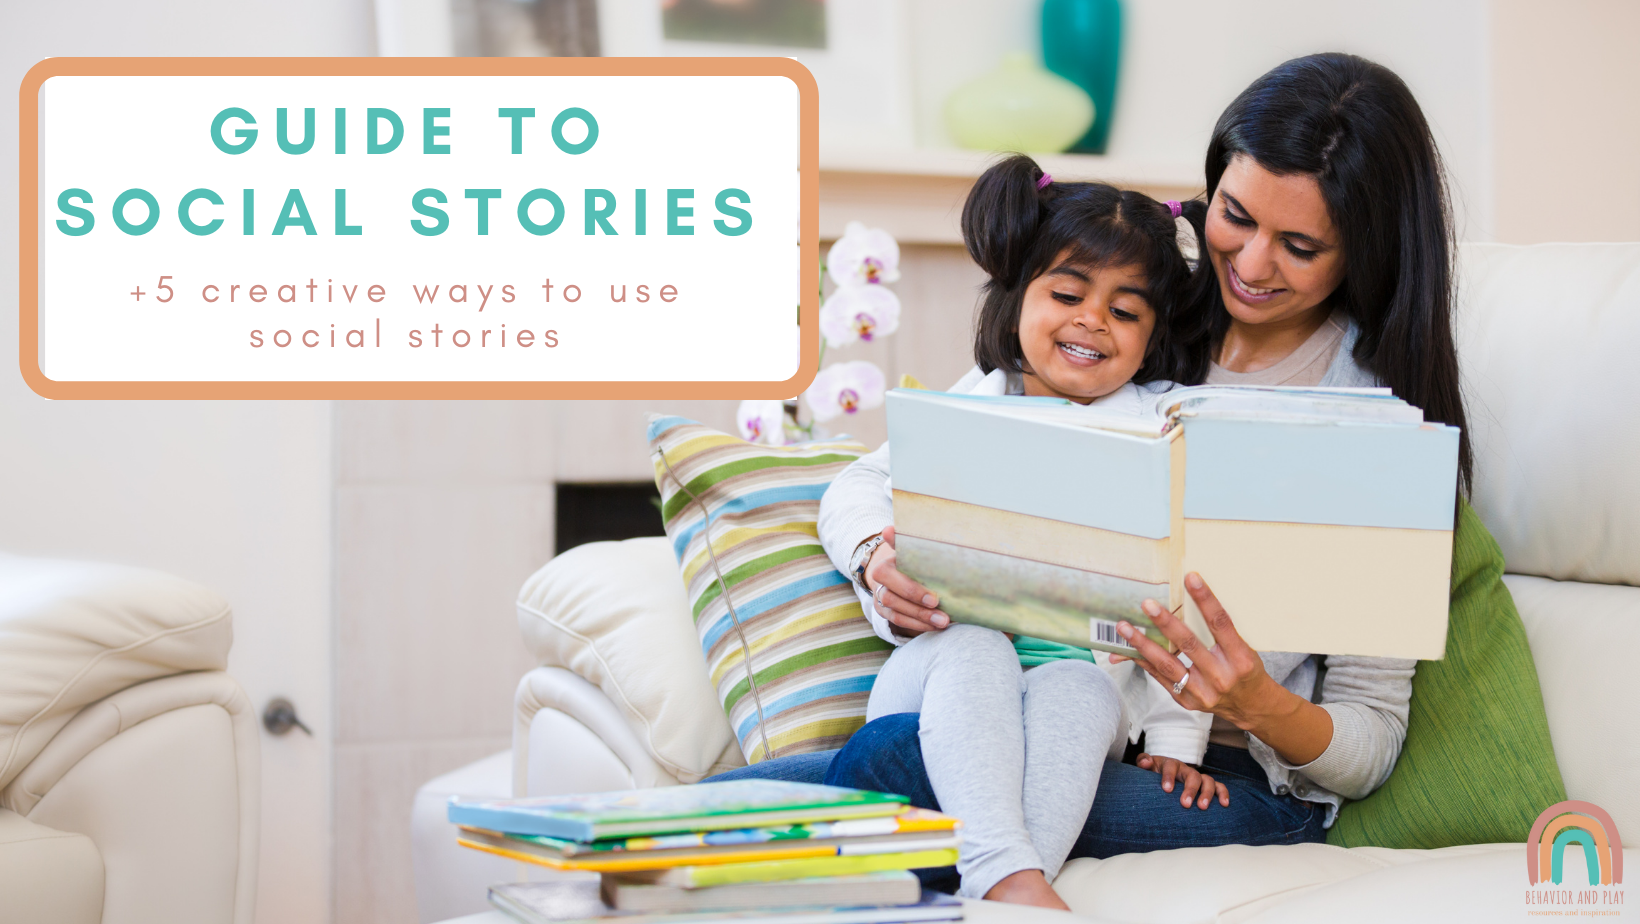 How to Use and Make Social Stories with Children 2021